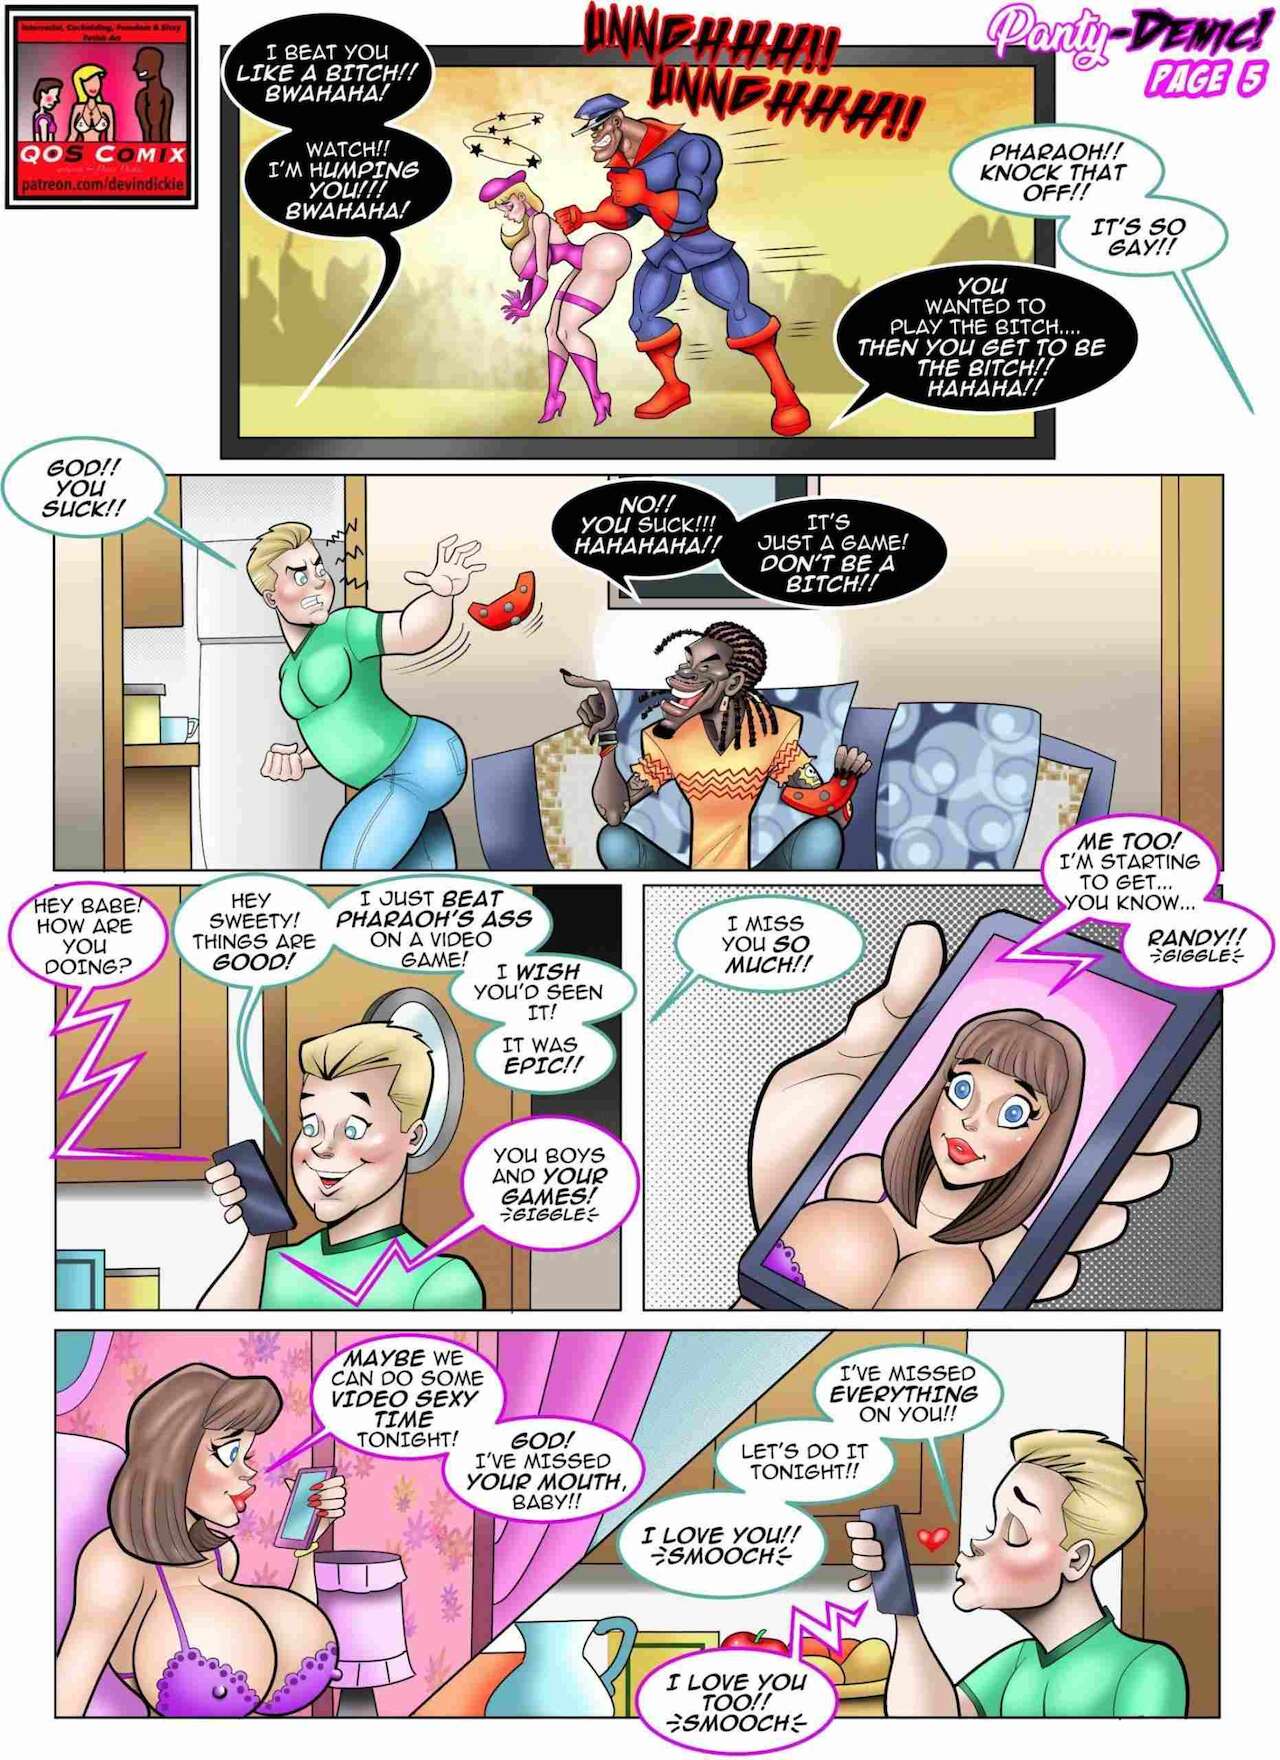 Panty-Demic - Devin Dickie - english page 6 full.